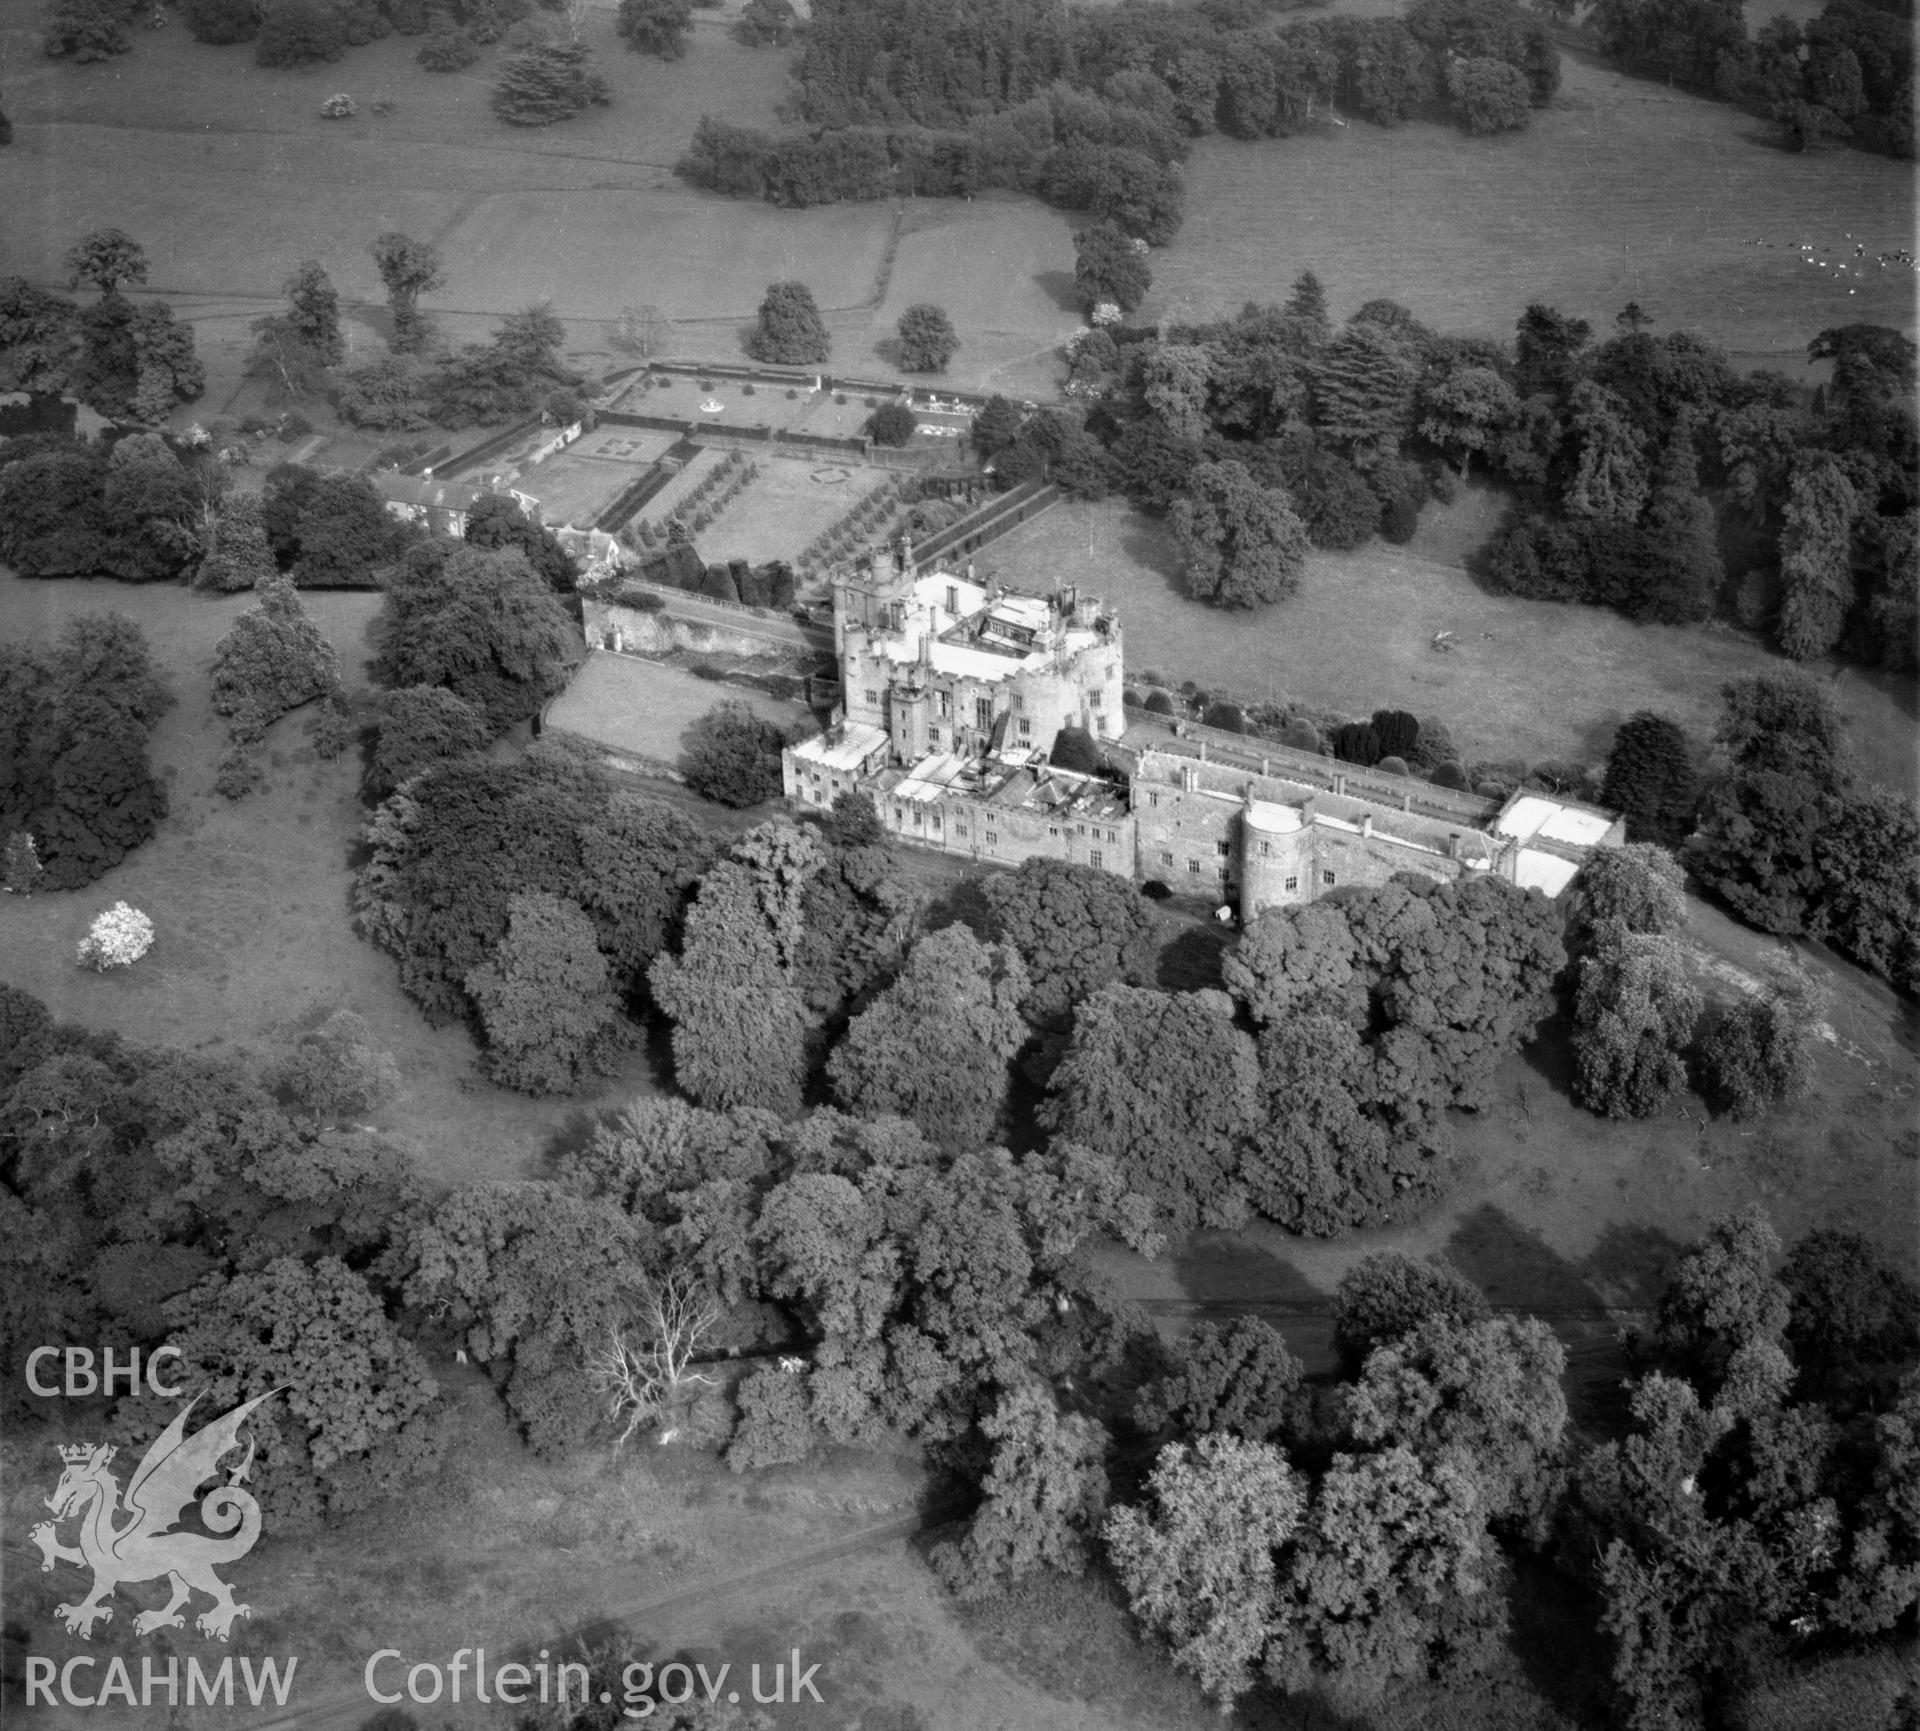 View of Powis castle and gardens